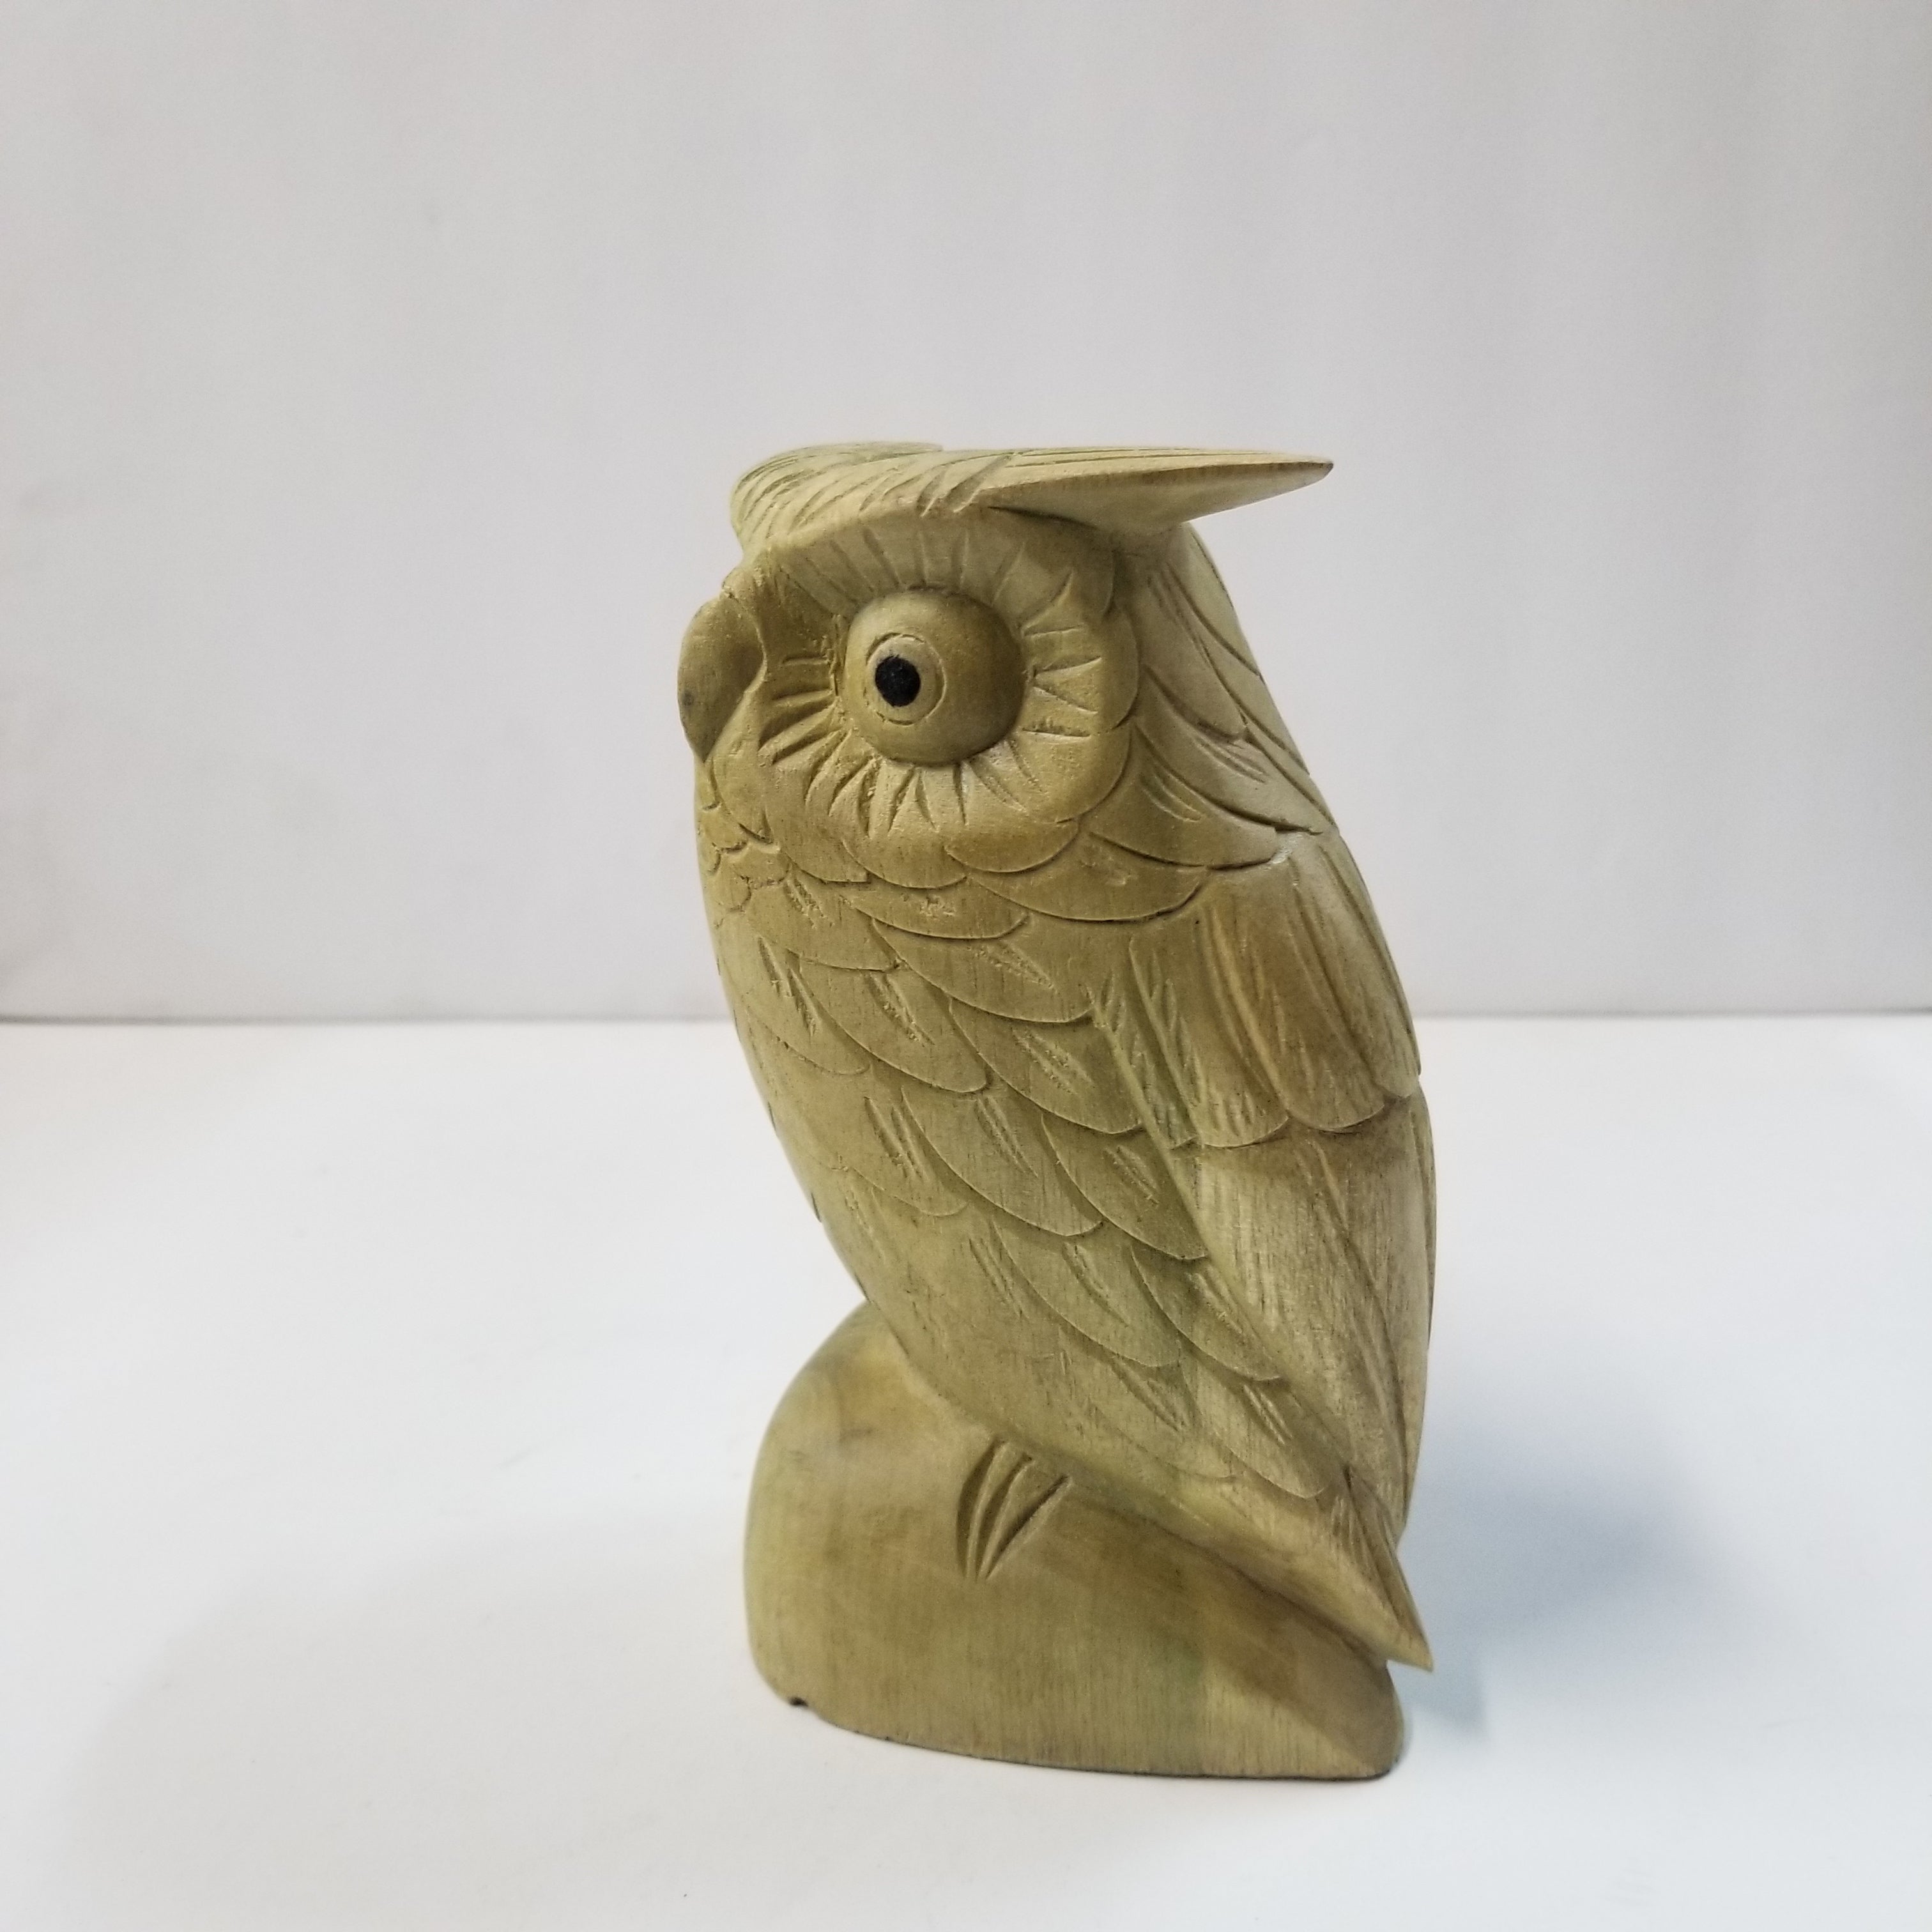  Statue | Home Decoration | Owl Carved Wooden Statue